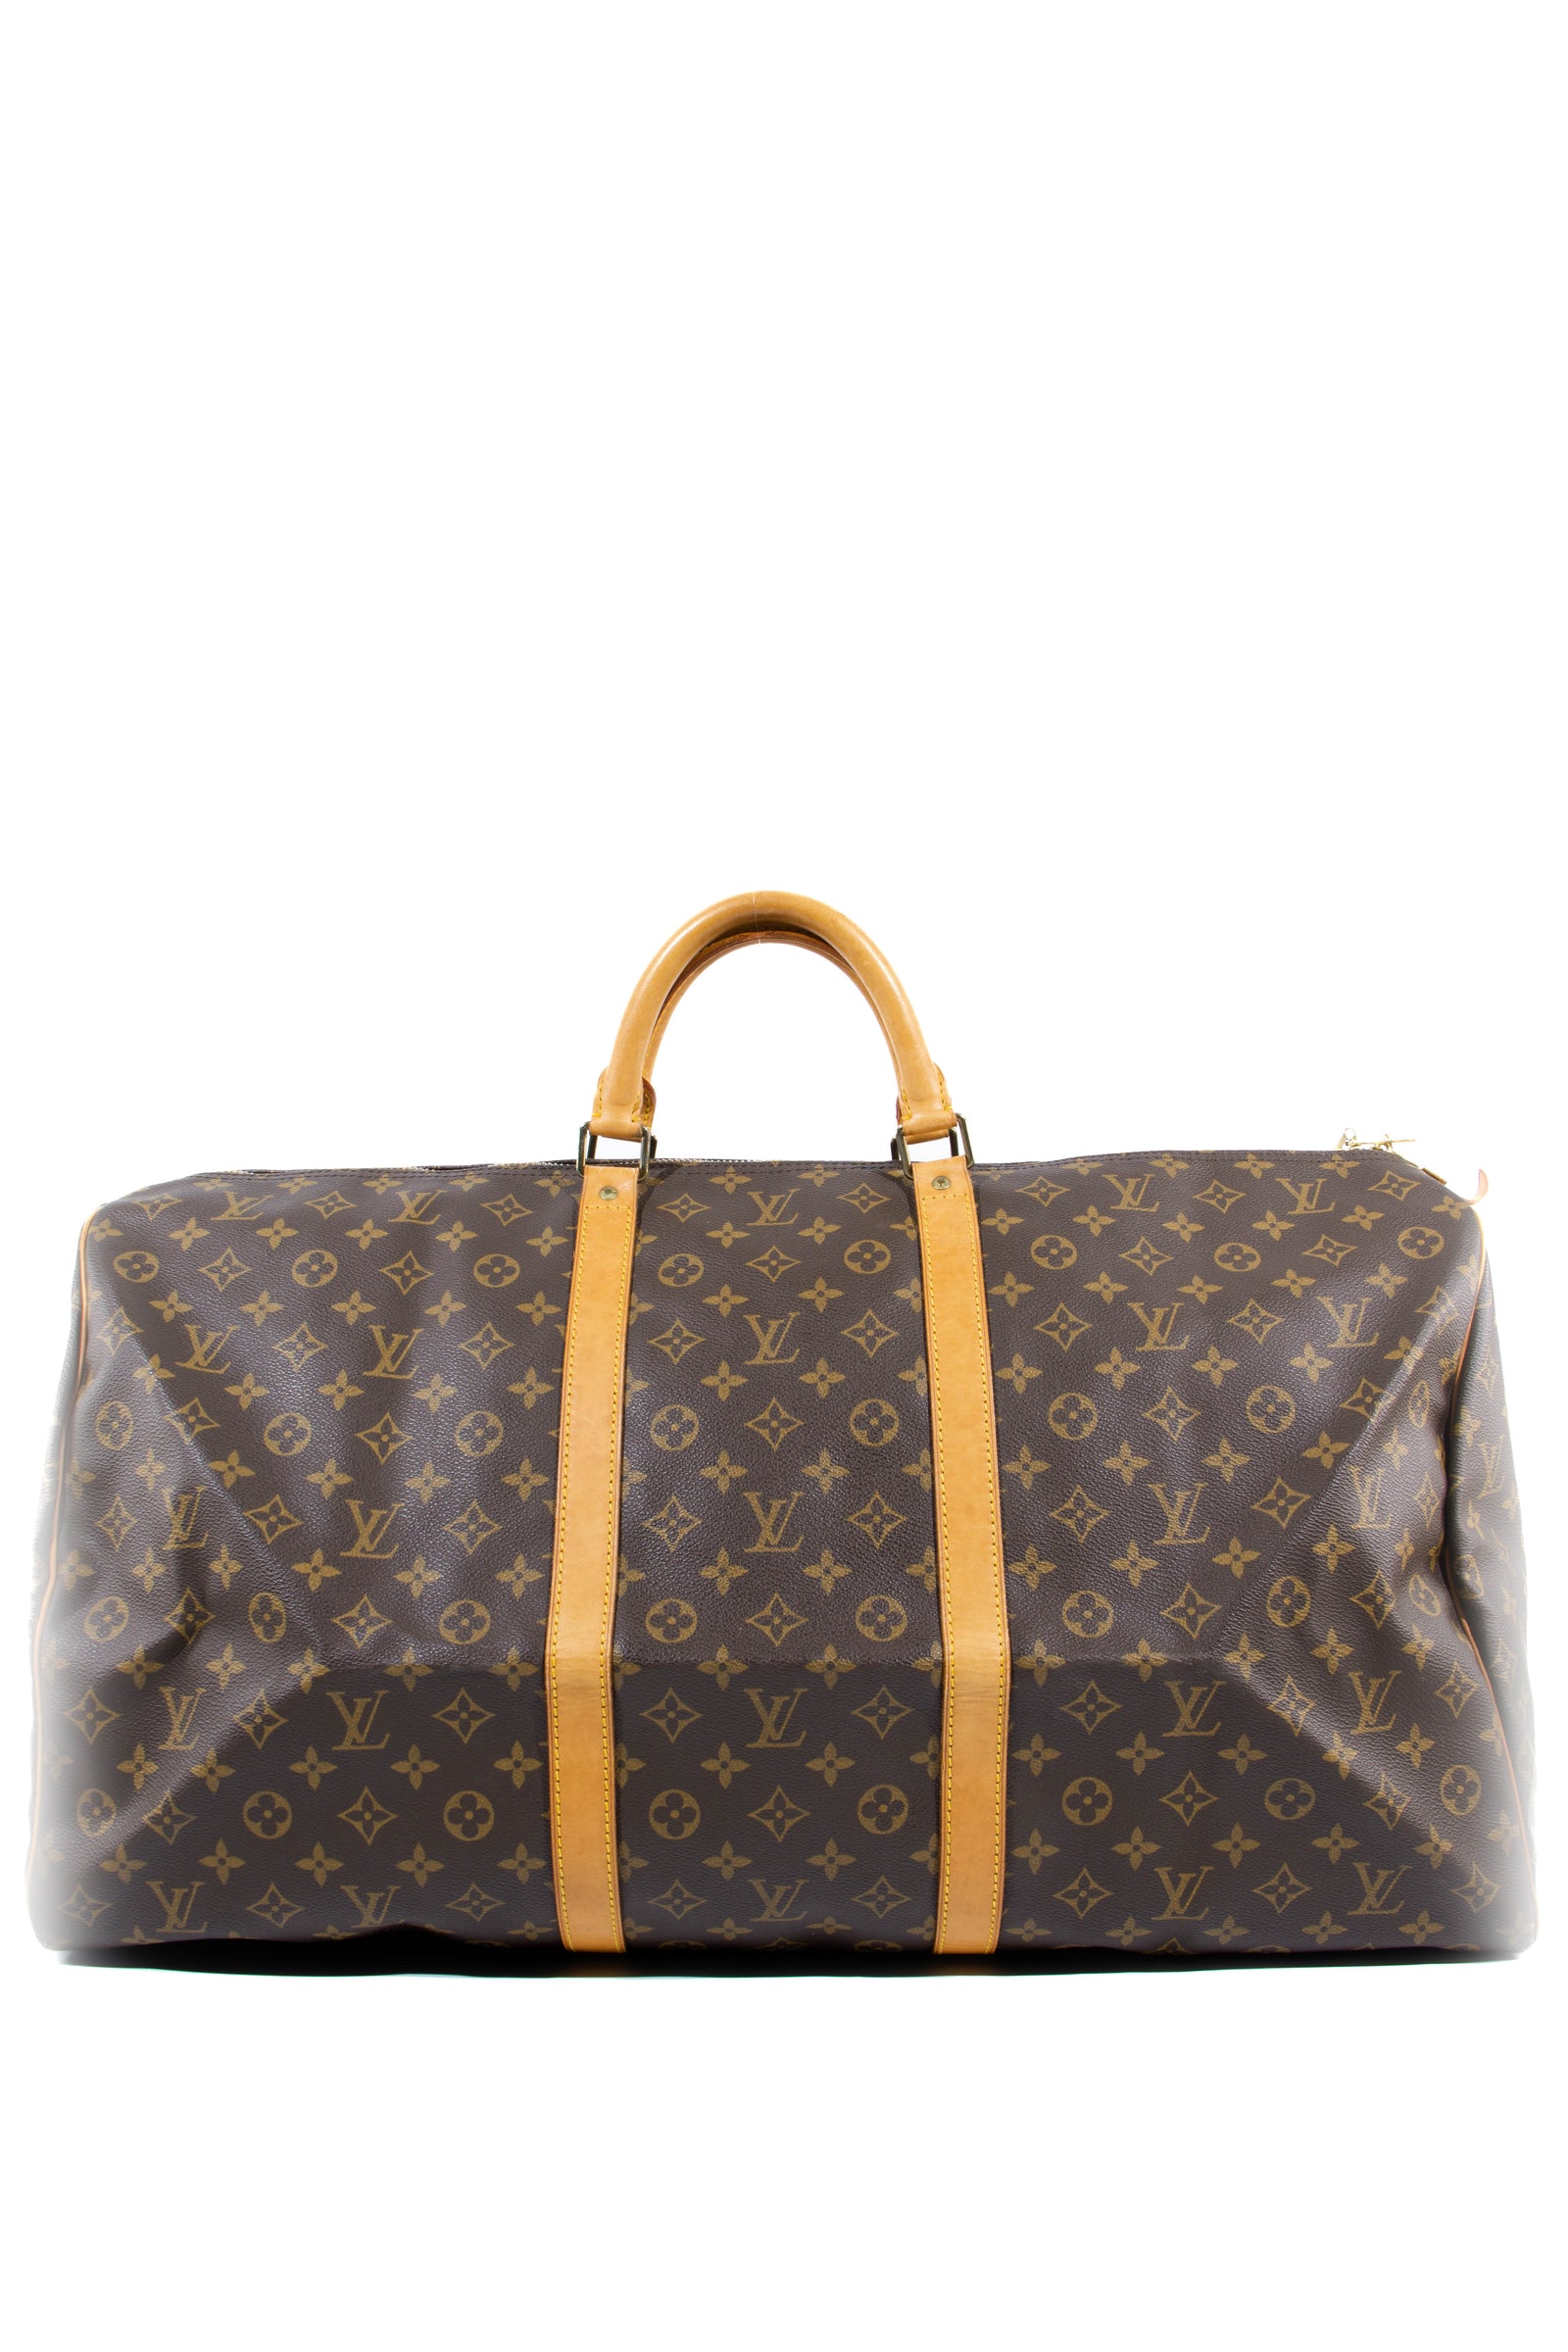 The History Of The Louis Vuitton Keepall Bag